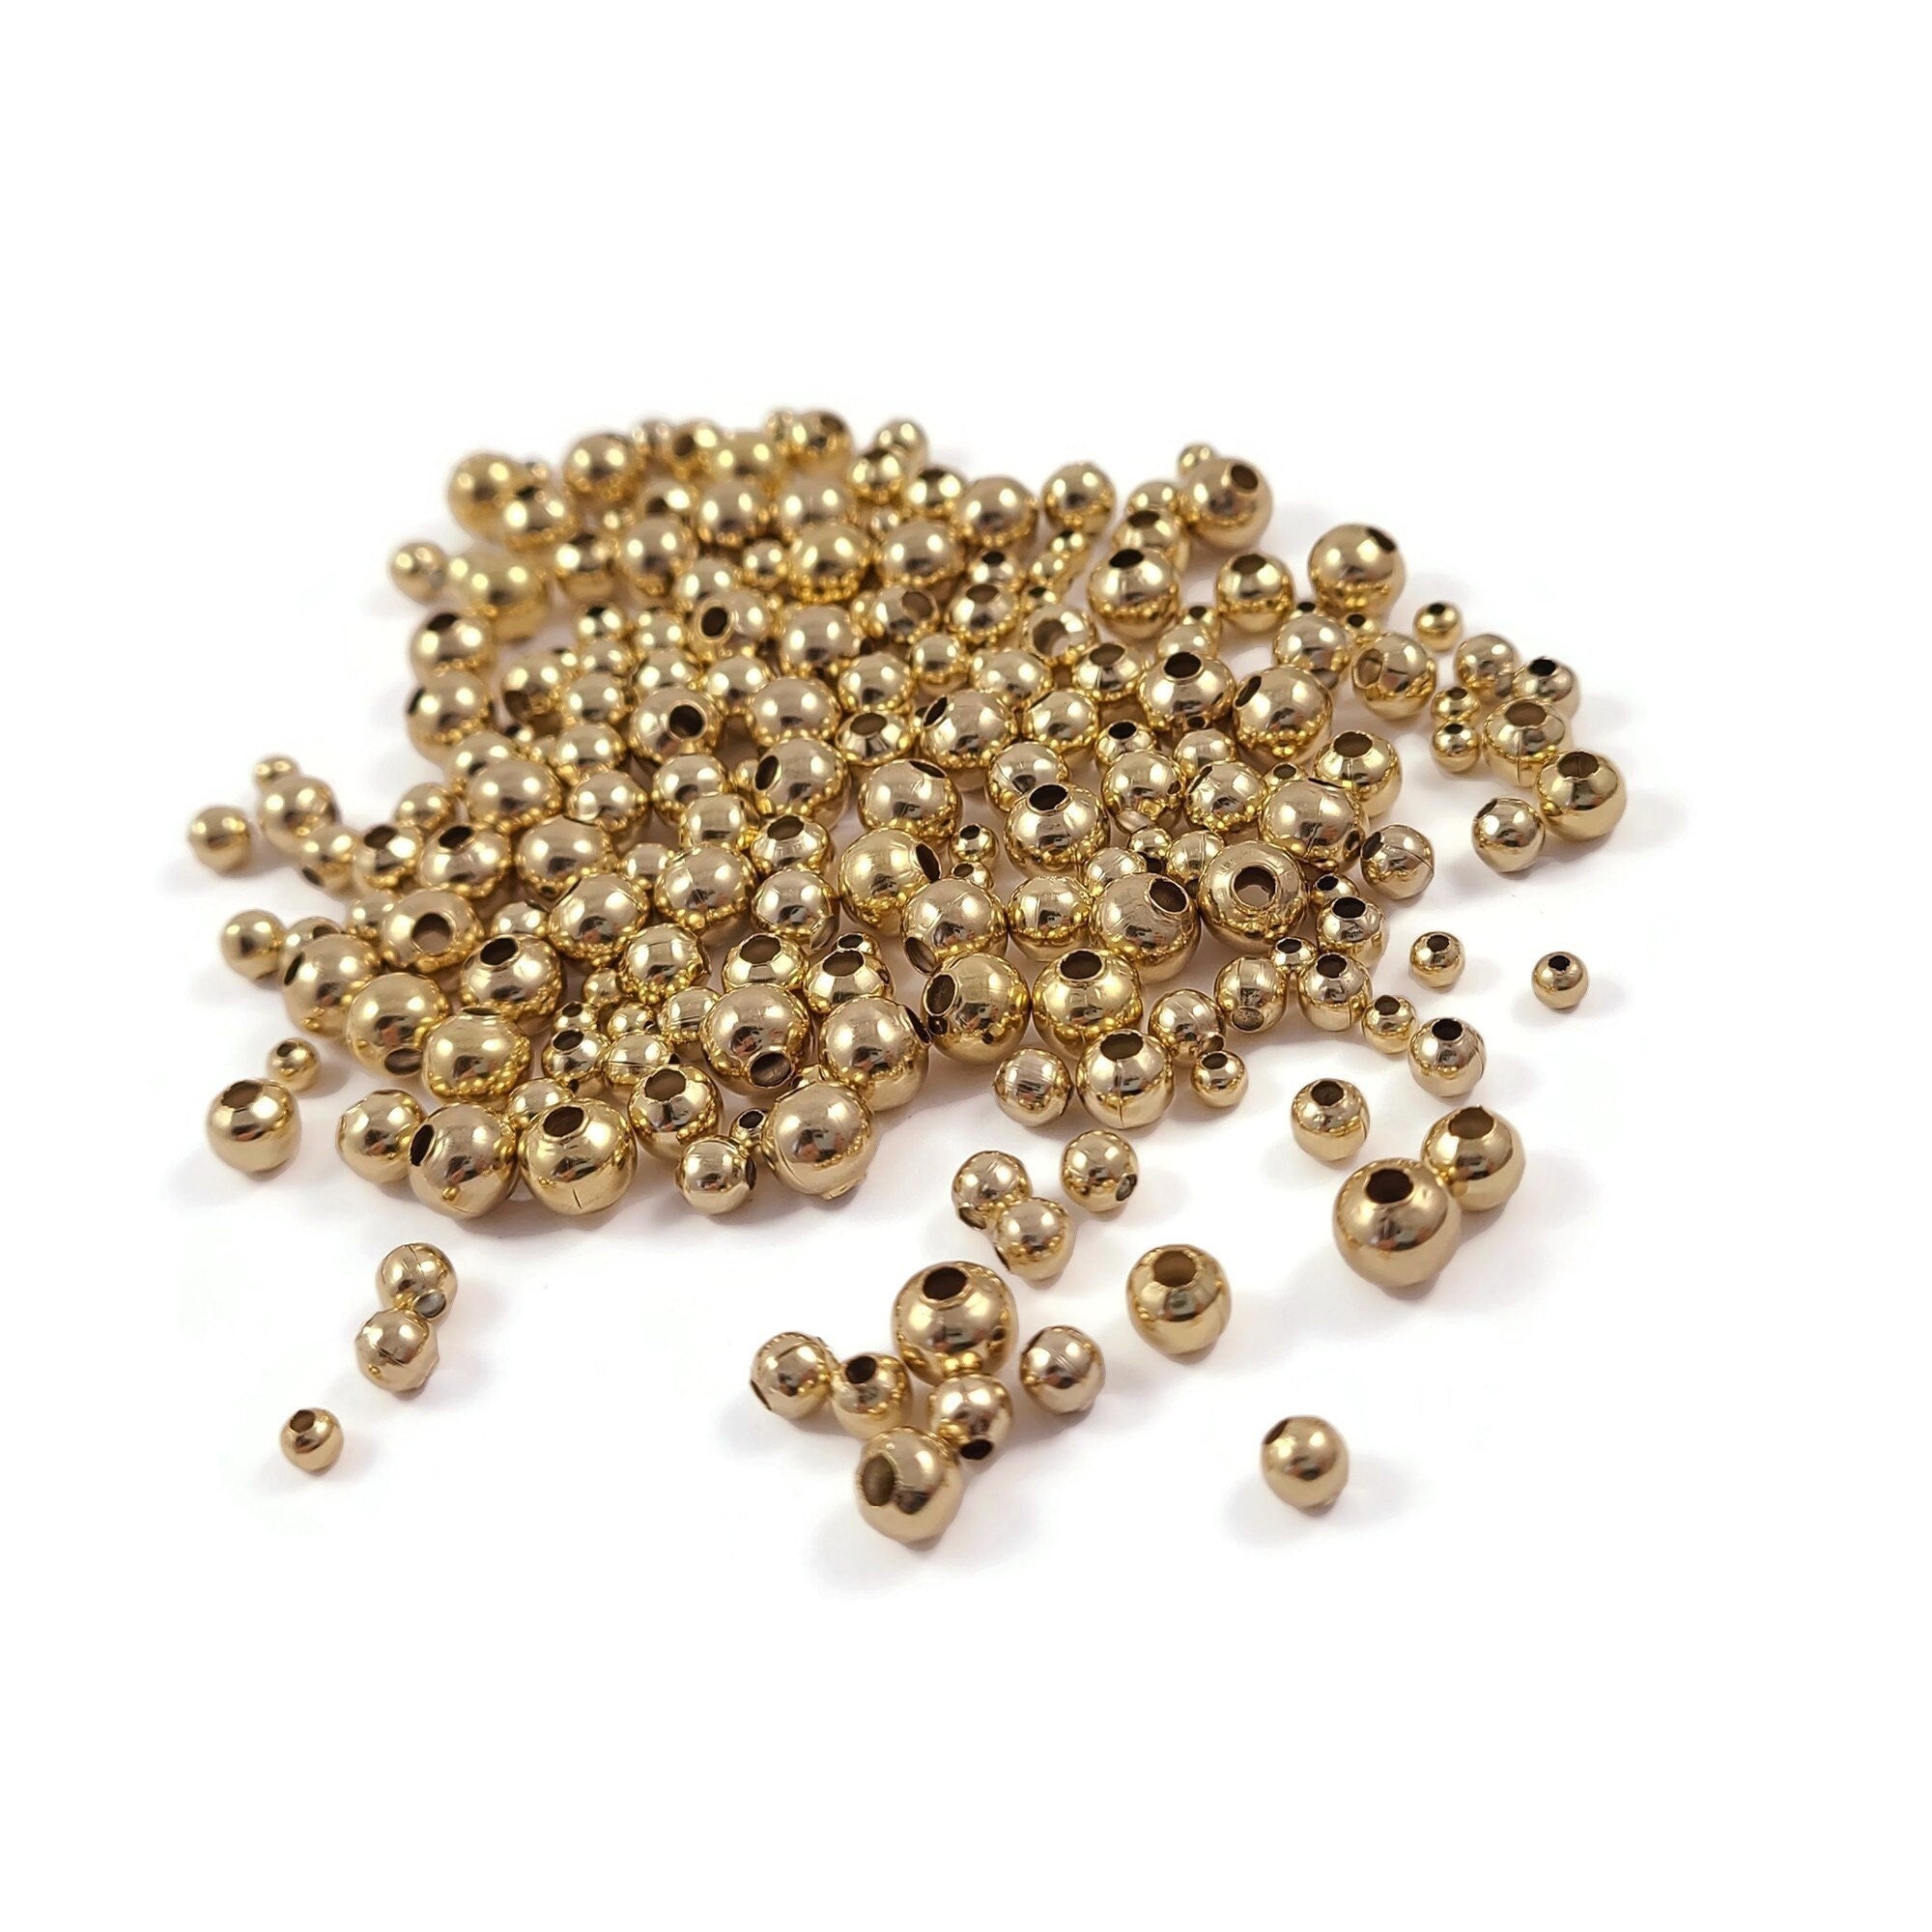 Gold stainless steel beads, 3mm, 4mm, 5mm, 6mm, Round metal spacer beads, Bulk jewelry making supplies